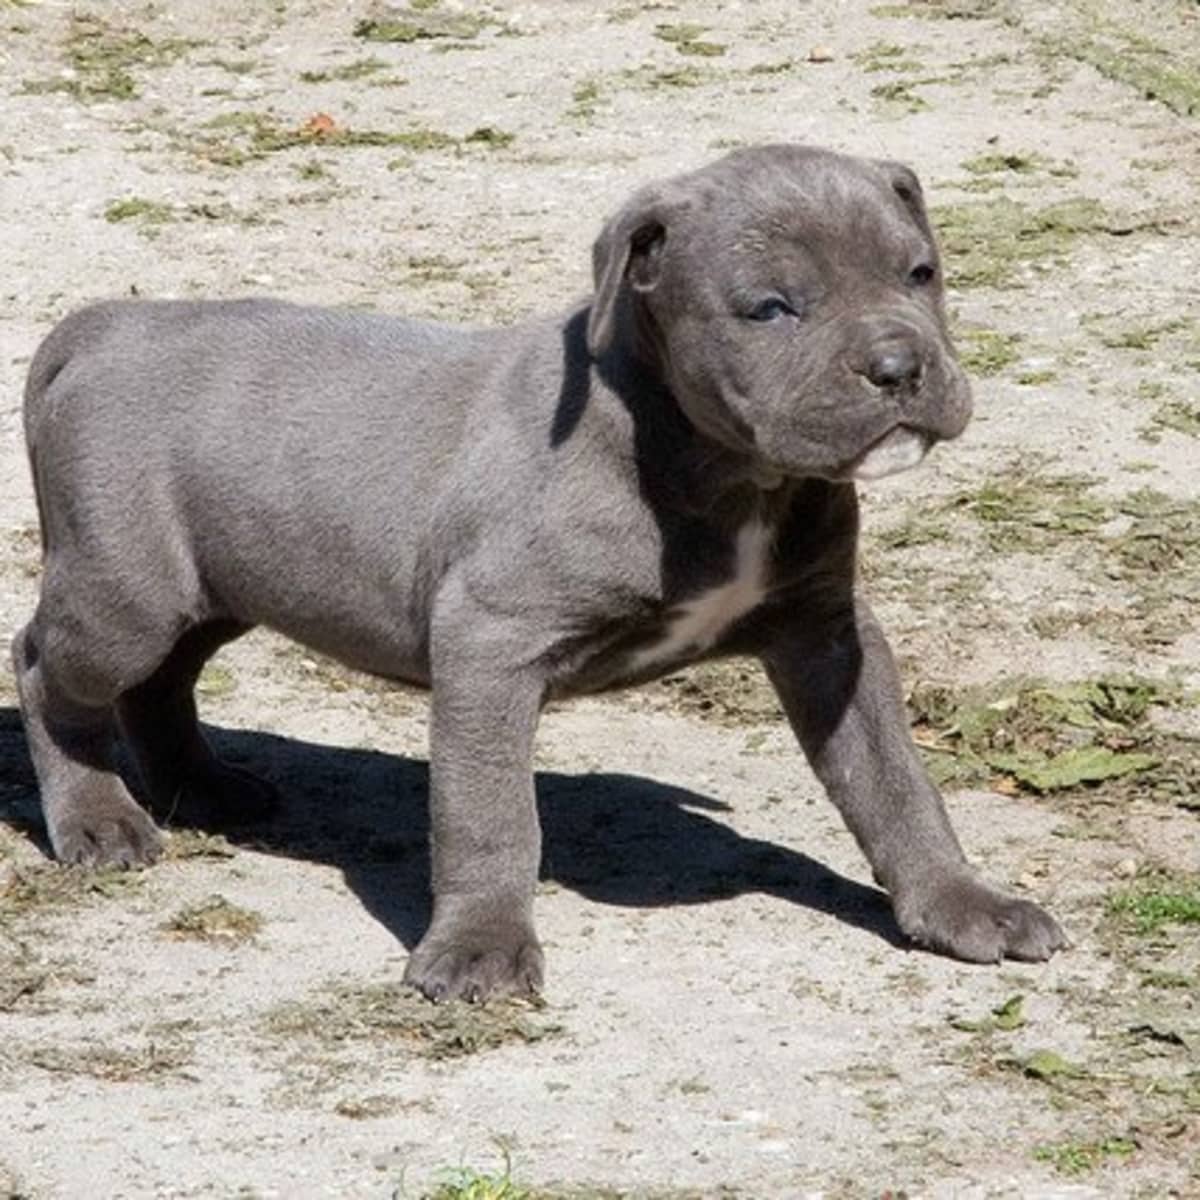 How Much Does It Cost to Own a Cane Corso?